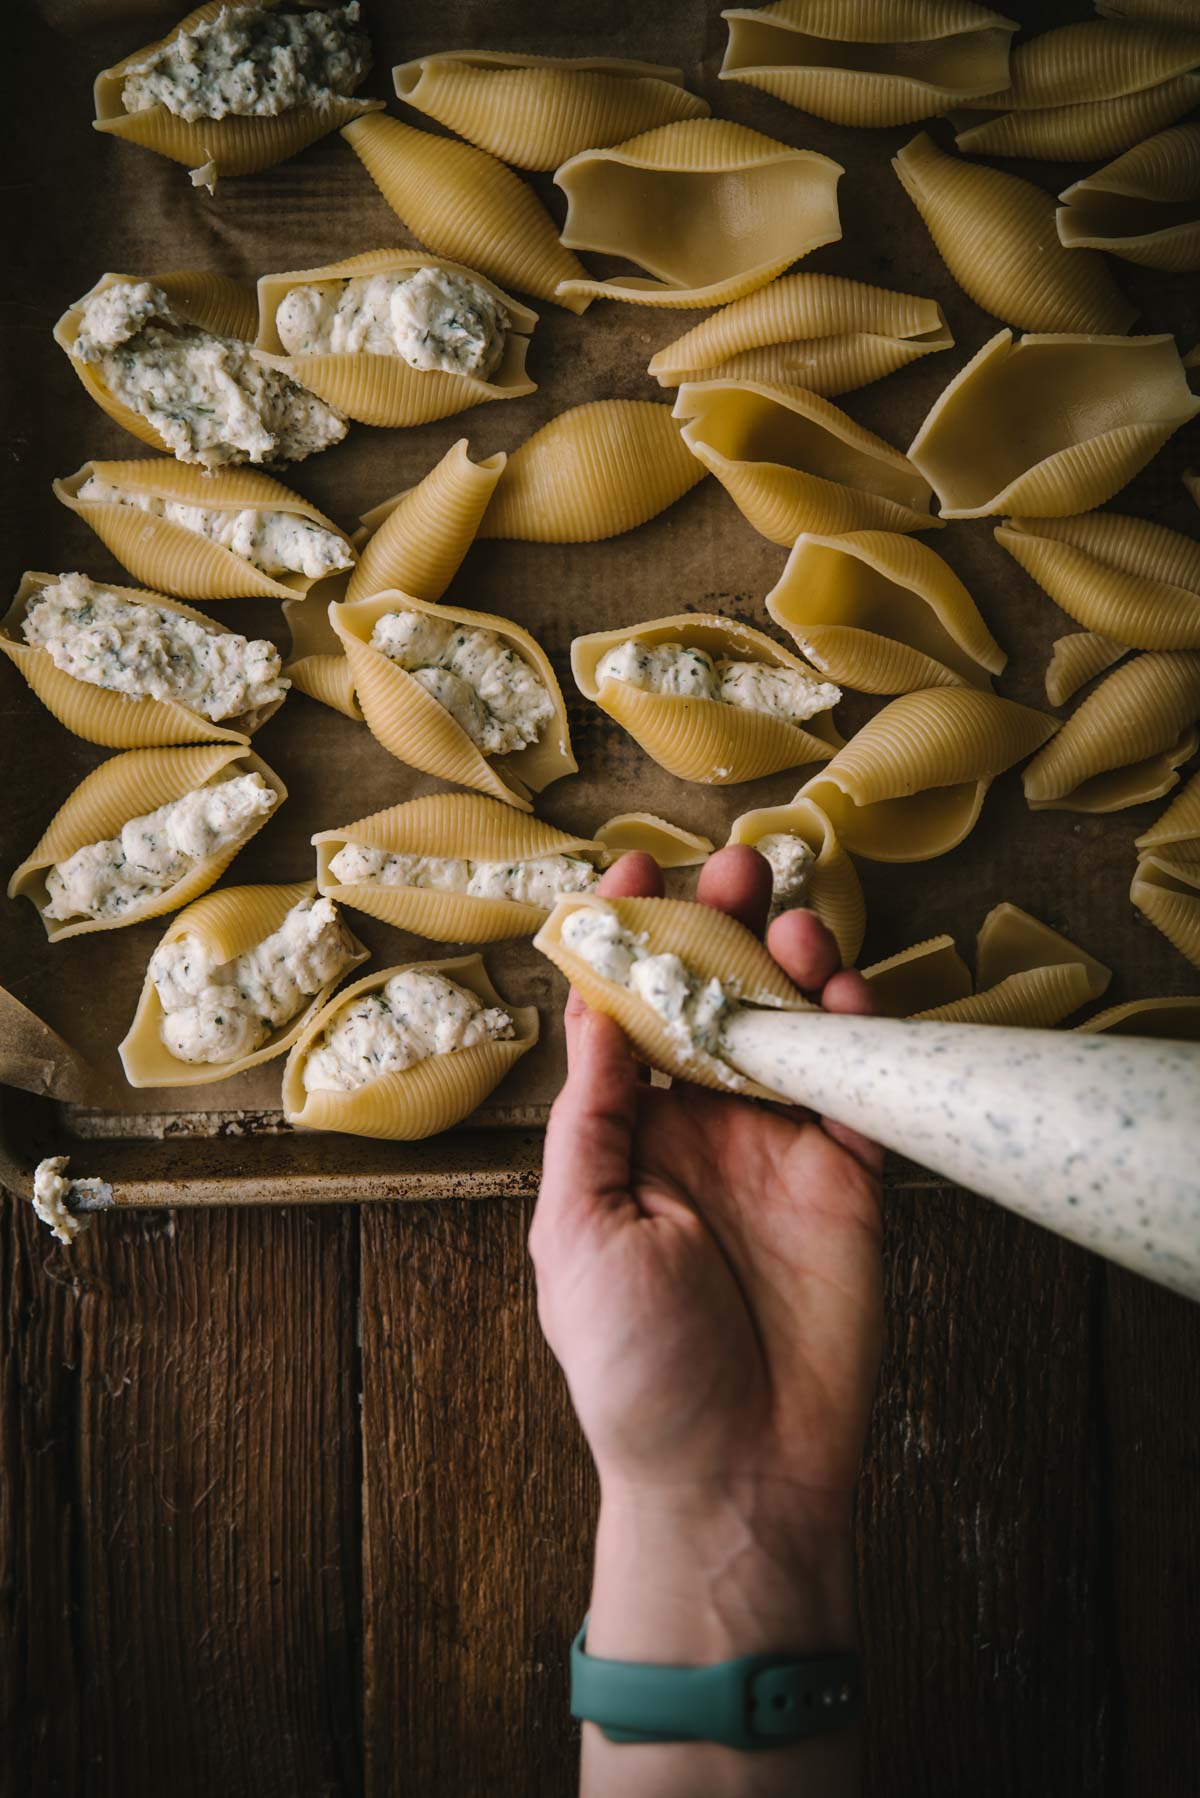 Someone is piping ricotta mixture into jumbo shell pasta through a piping bag. They are holding one shell in their hand while they pipe. A lined sheet try lays underneath where all the other stuffed shells are resting.